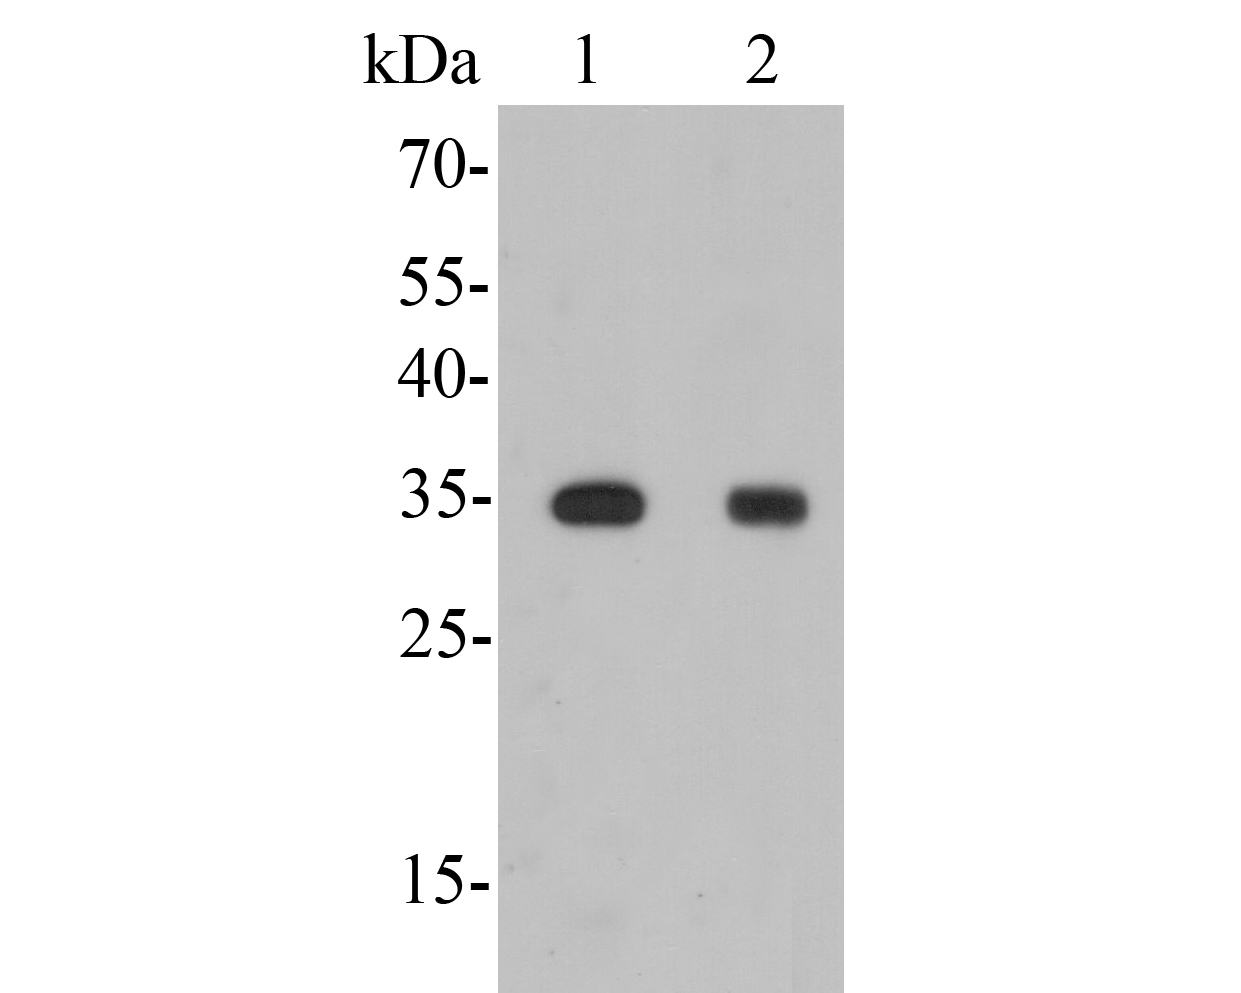 Western blot analysis of GAL4 on different lysates. Proteins were transferred to a PVDF membrane and blocked with 5% BSA in PBS for 1 hour at room temperature. The primary antibody (ER1902-63, 1/500) was used in 5% BSA at room temperature for 2 hours. Goat Anti-Rabbit IgG - HRP Secondary Antibody (HA1001) at 1:5,000 dilution was used for 1 hour at room temperature.<br />
Positive control: <br />
Lane 1: Human small intestine tissue lysate<br />
Lane 2: Mouse colon tissue lysate